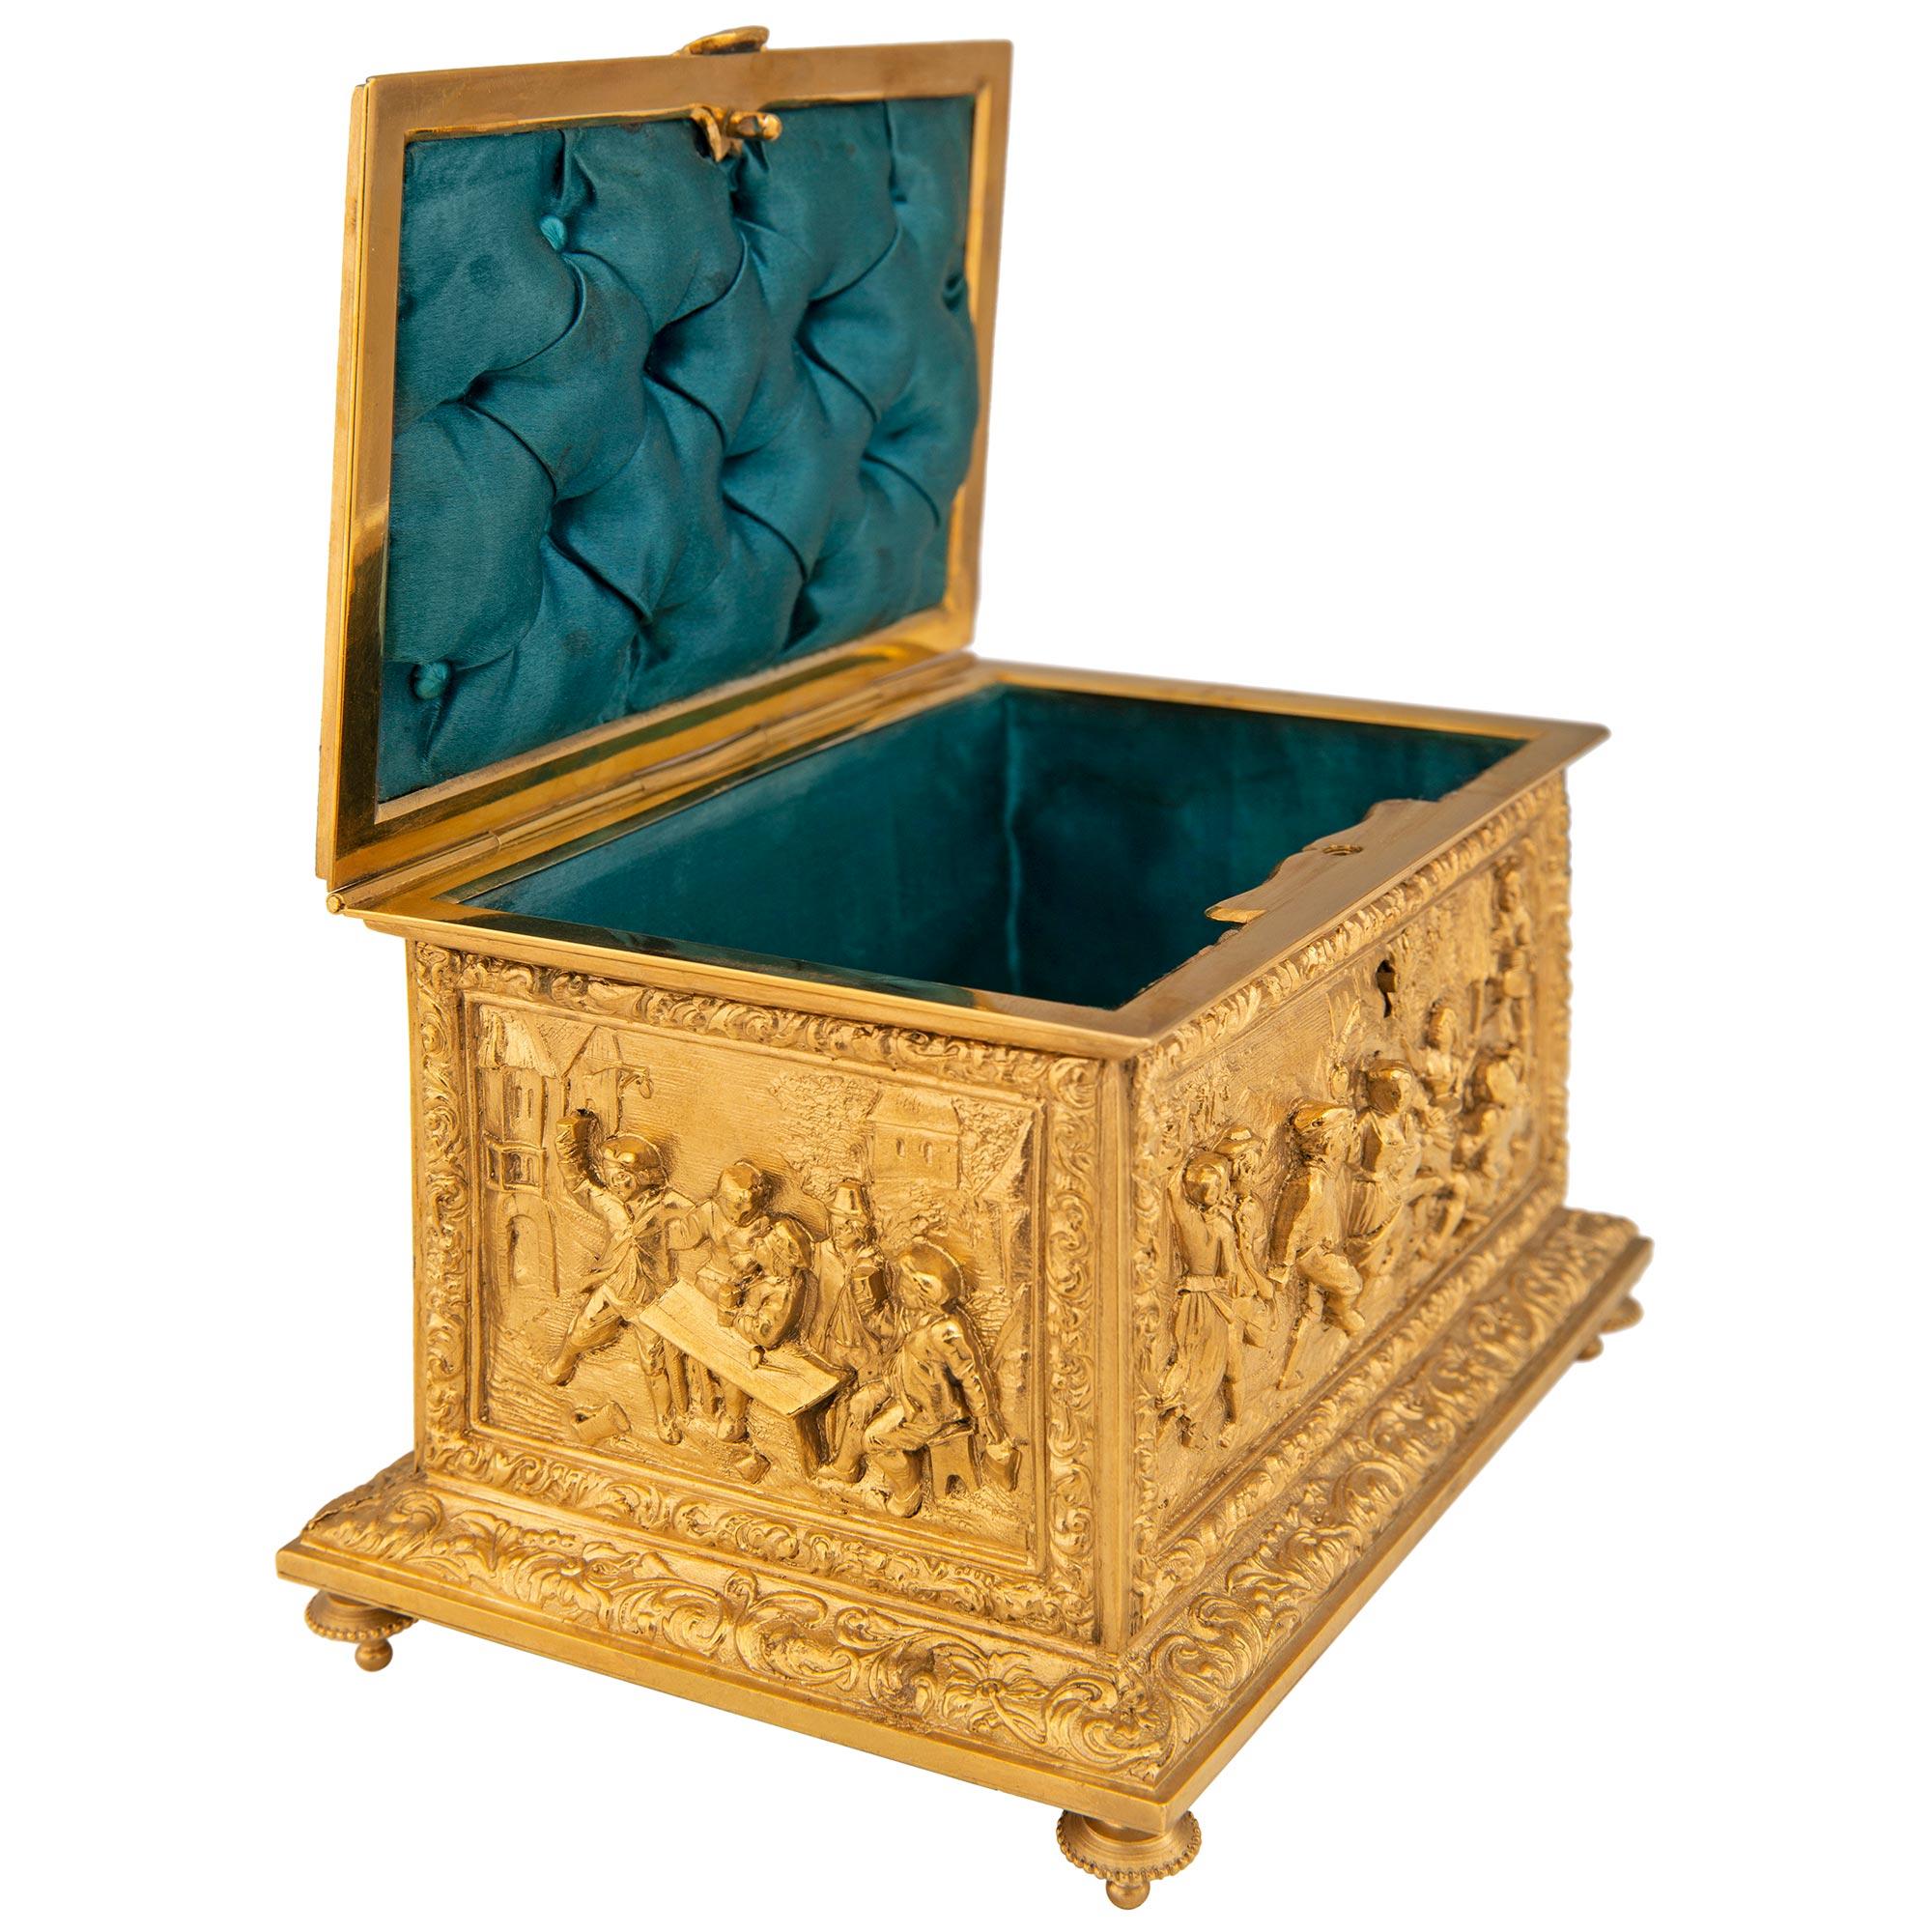 A stunning and highly detailed French 19th century Renaissance st. Ormolu jewelry box, signed A.B. Paris. This beautiful box is raised by four topie shaped feet mounted under a rectangular base with foliate scrolls on all sides. Above the base is